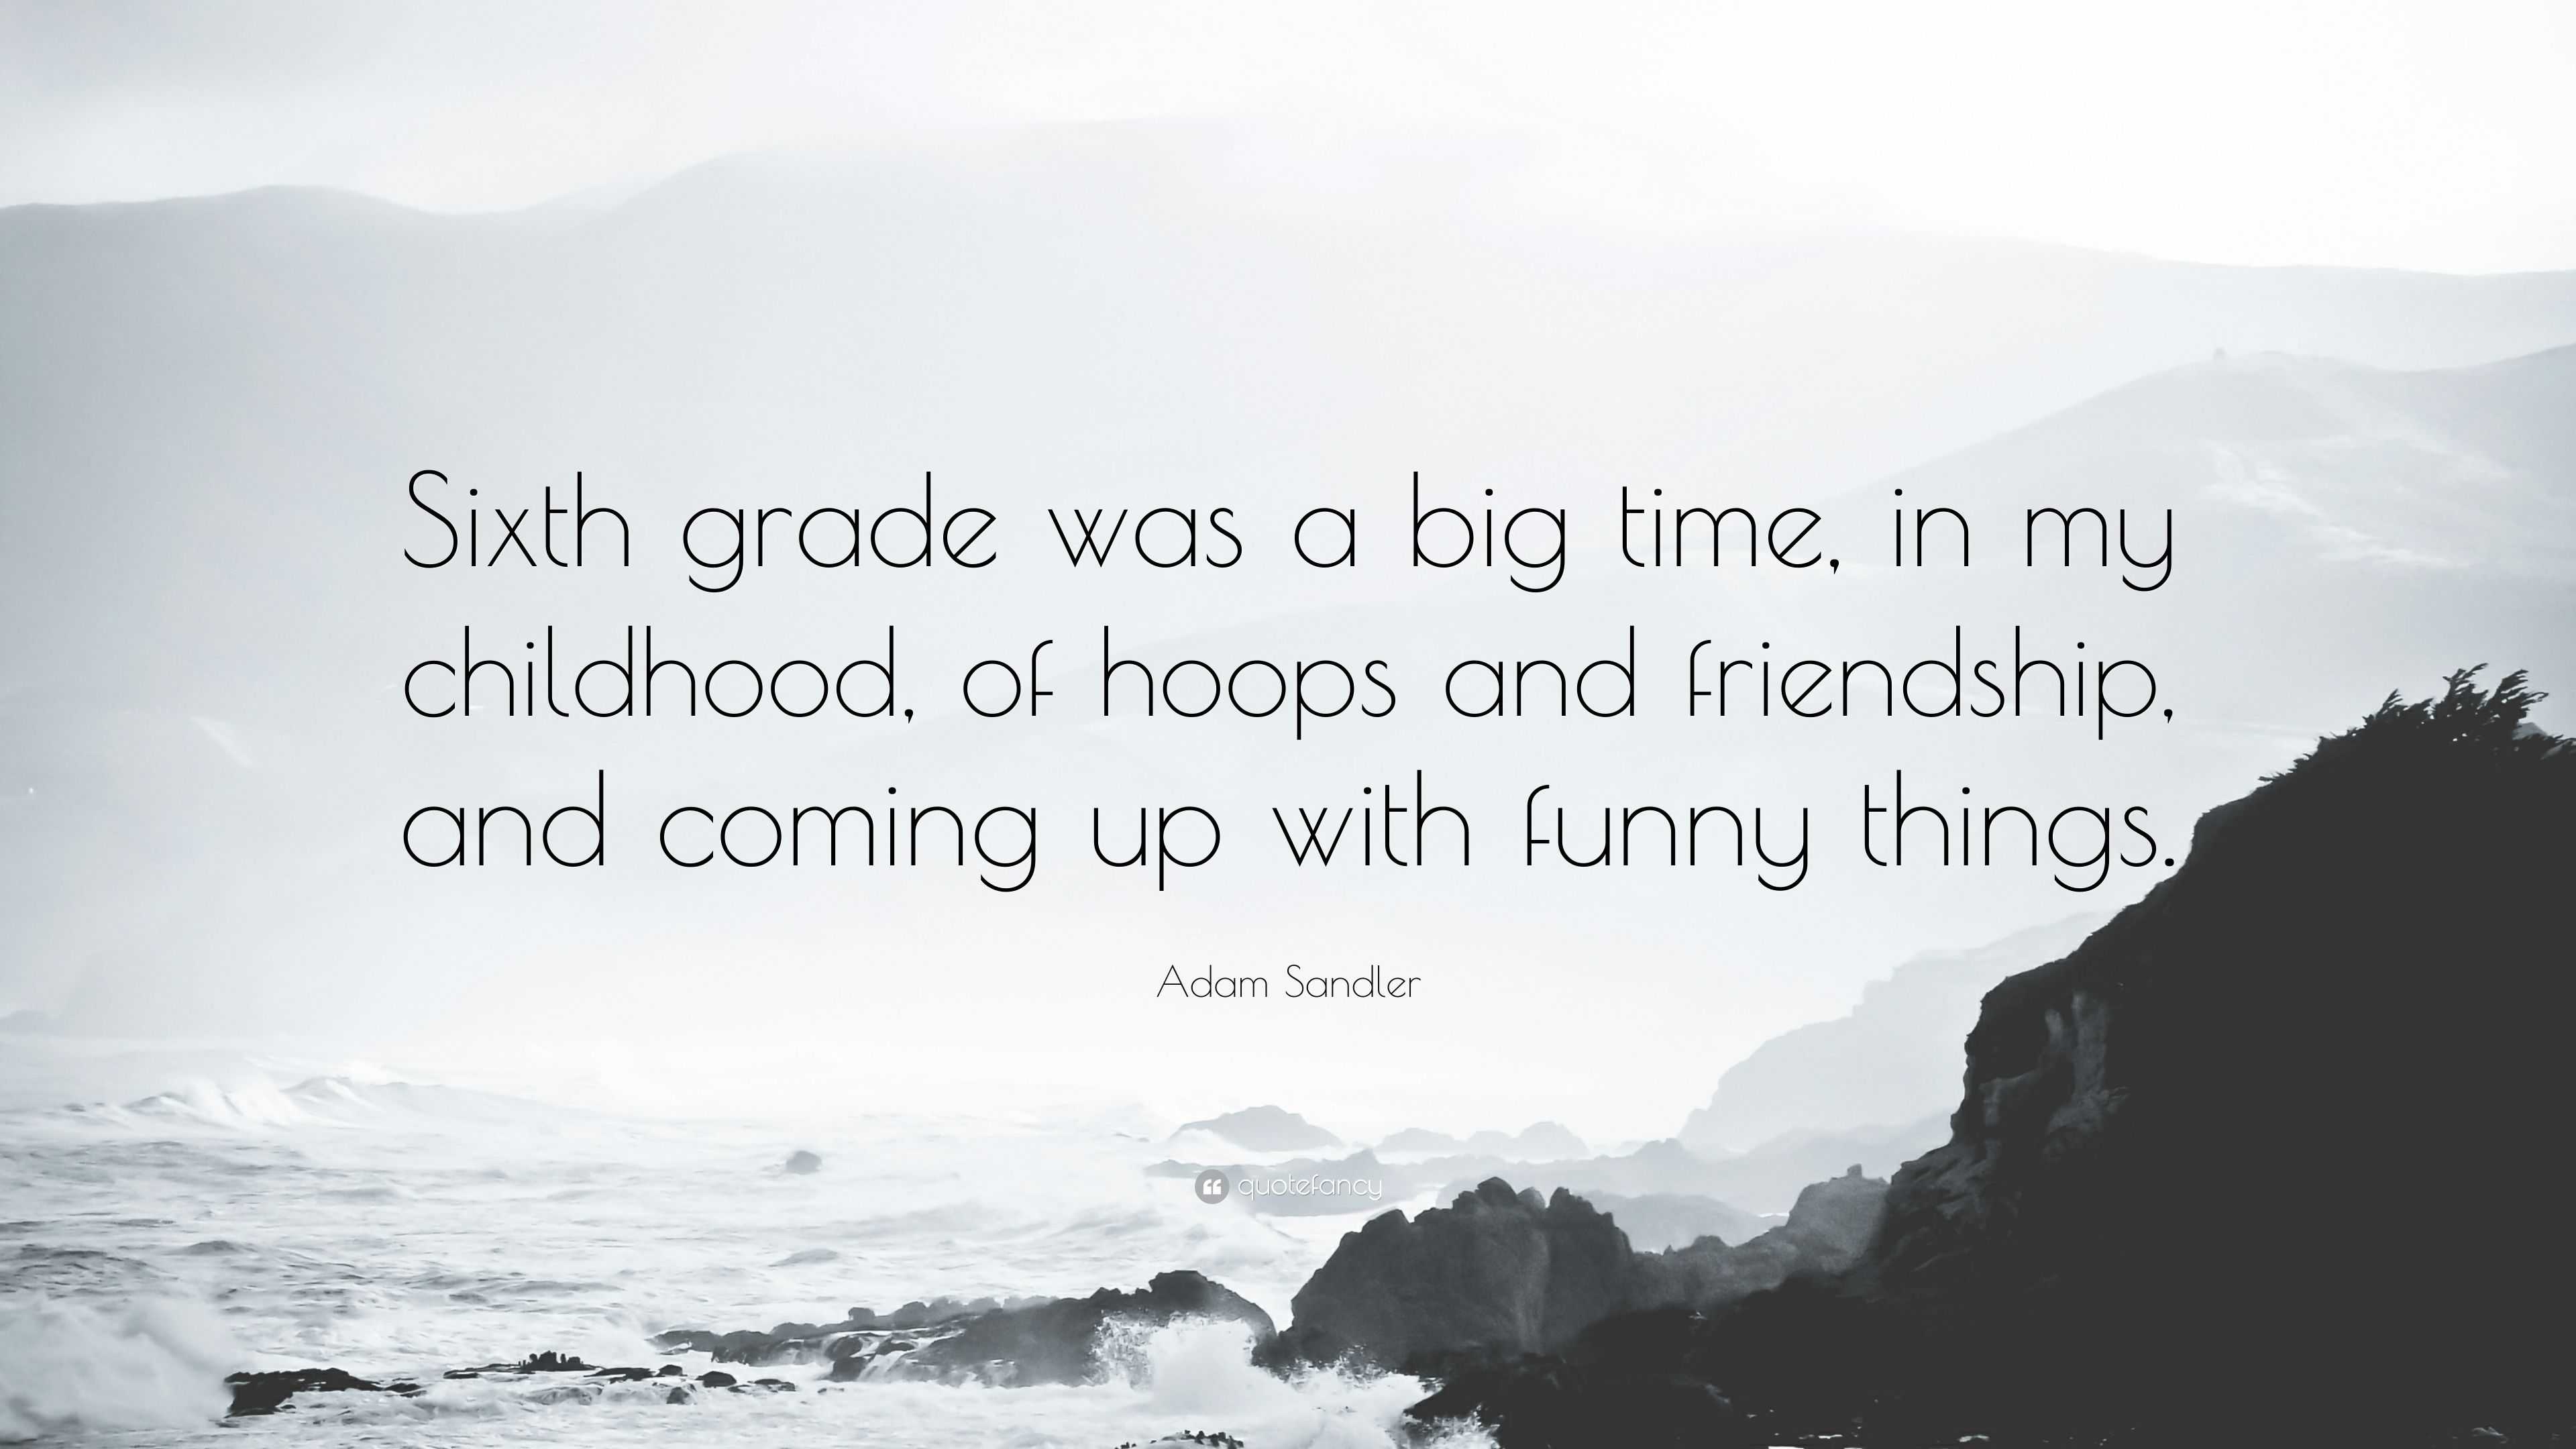 Adam Sandler Quote: “Sixth grade was a big time, in my childhood, of hoops  and friendship,